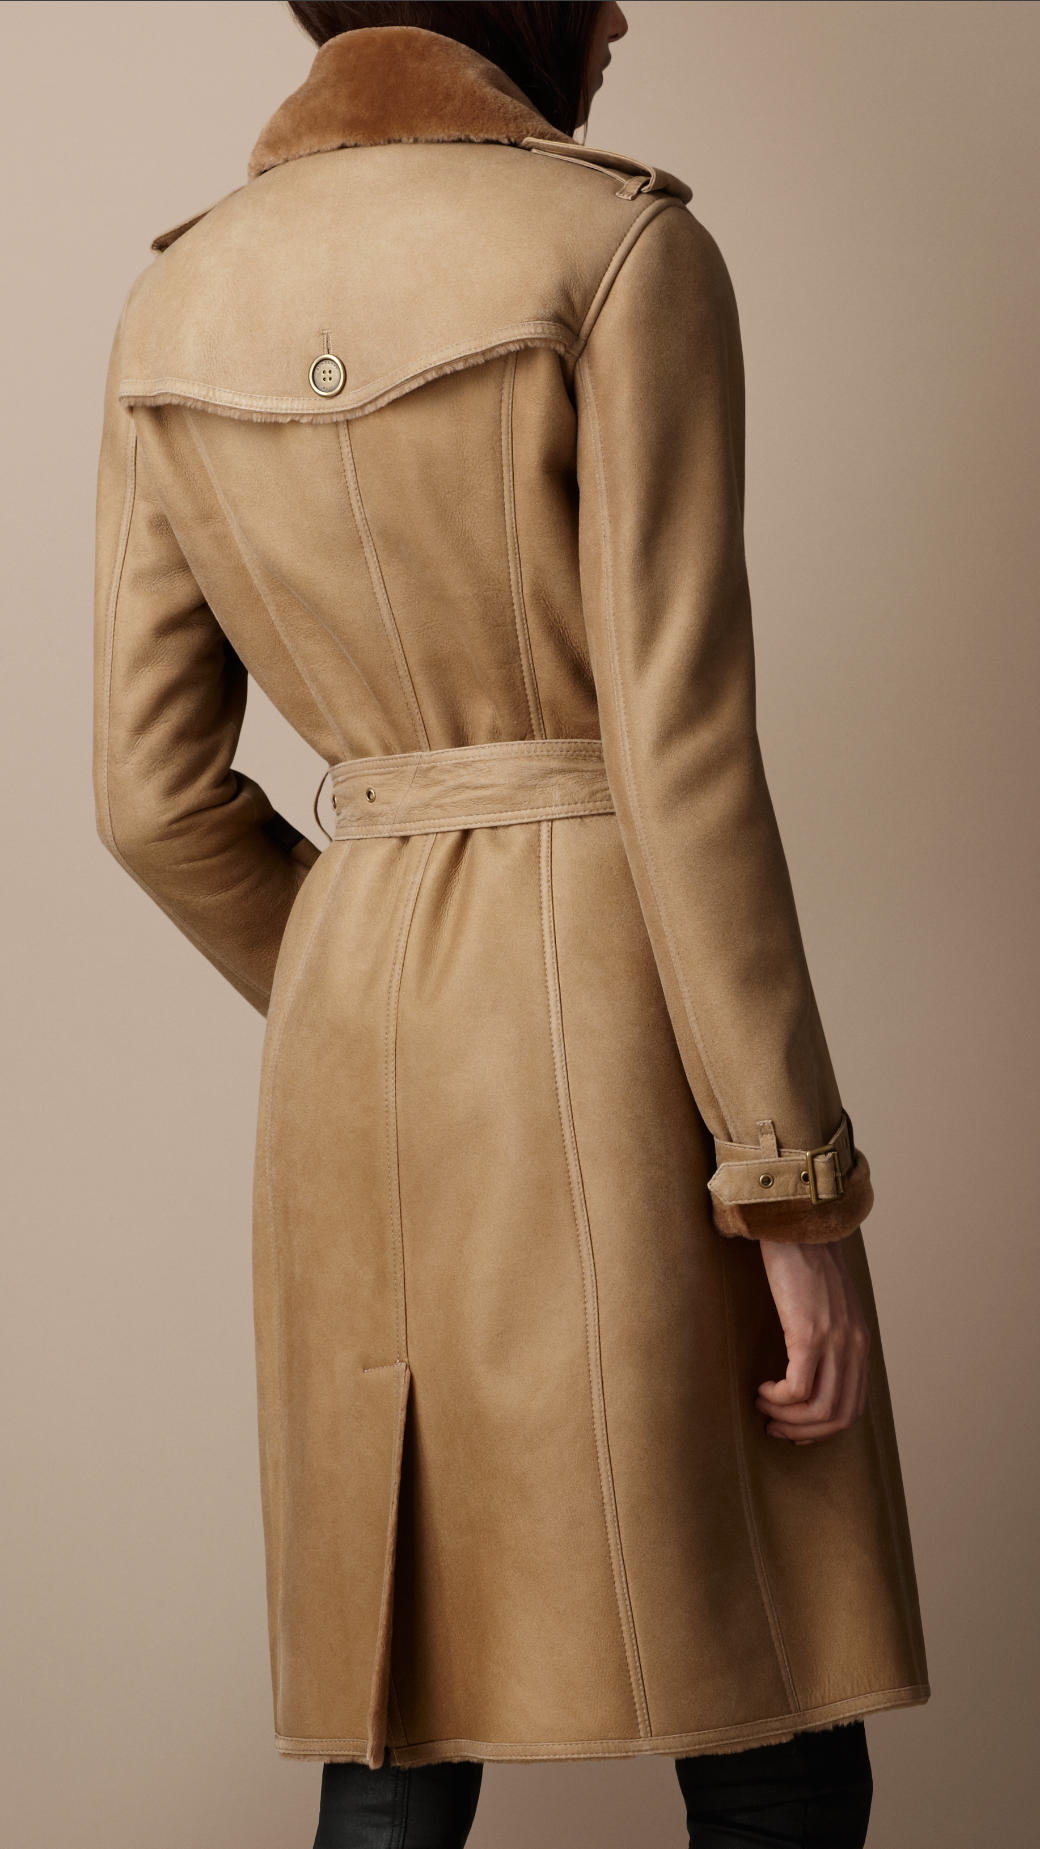 Lyst - Burberry Brit Lamb Leather Trench Coat in Natural